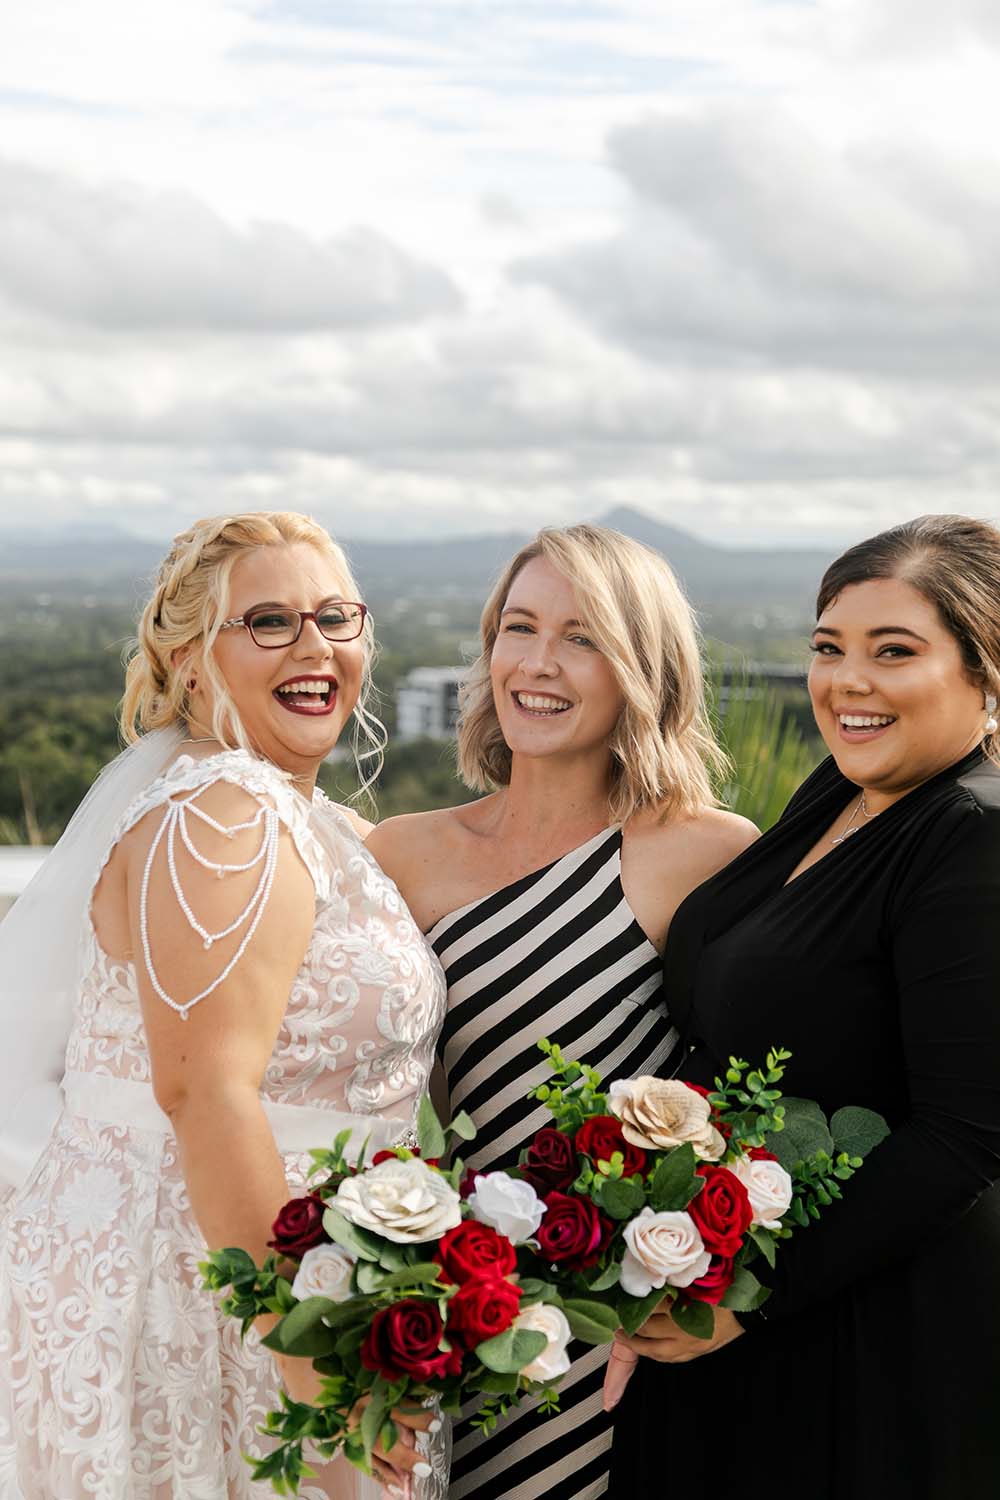 Destination Wedding Photography - Bride and guests